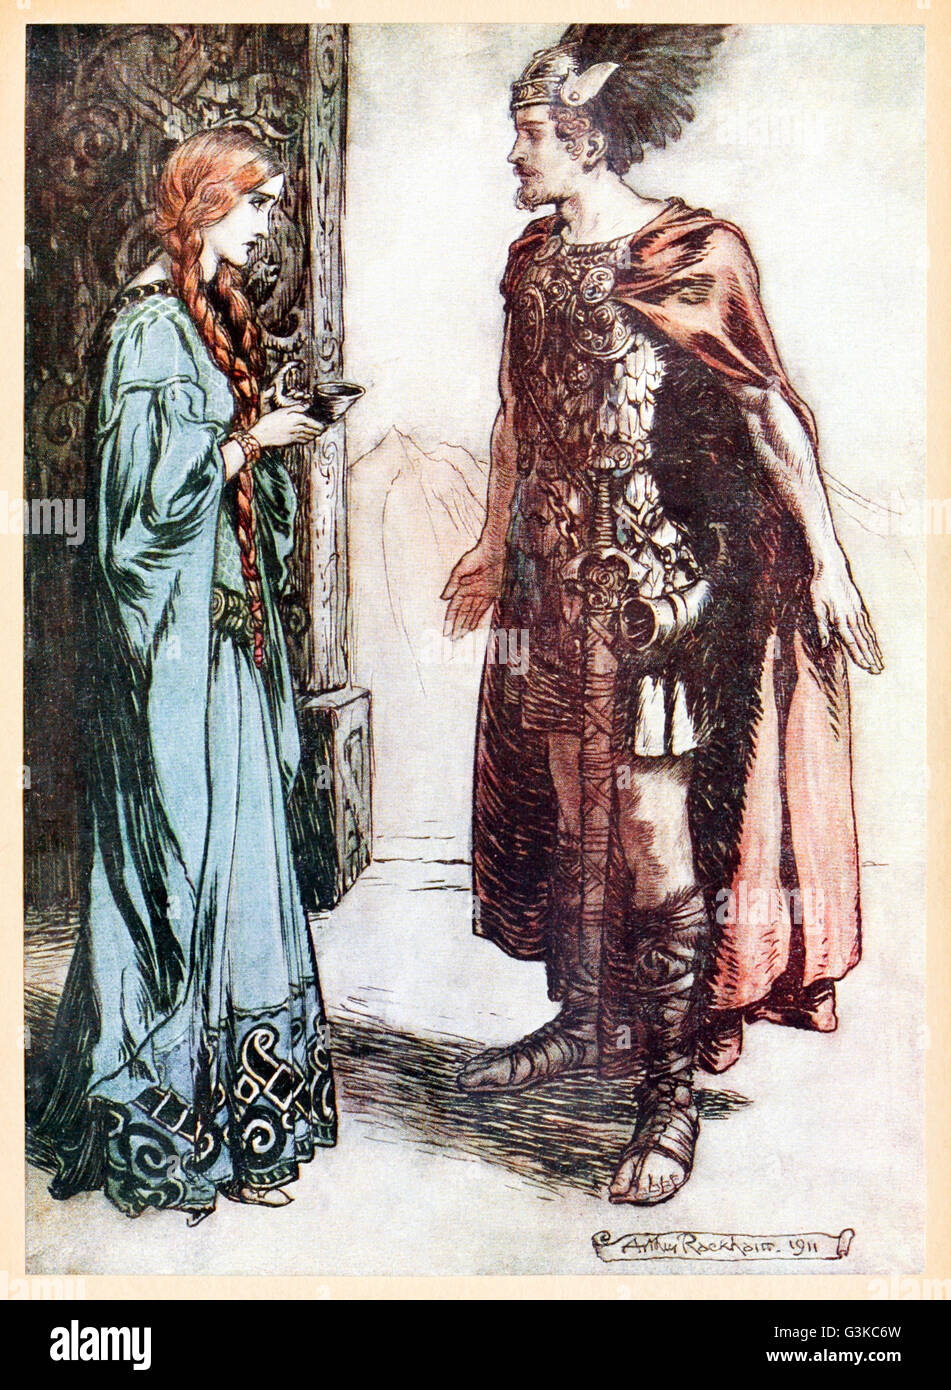 “Siegfried hands the drinking-horn back to Gutrune, and gazes at her with sudden passion” from 'Siegfried & The Twilight of the Gods' illustrated by Arthur Rackham (1867-1939). See description for more information. Stock Photo